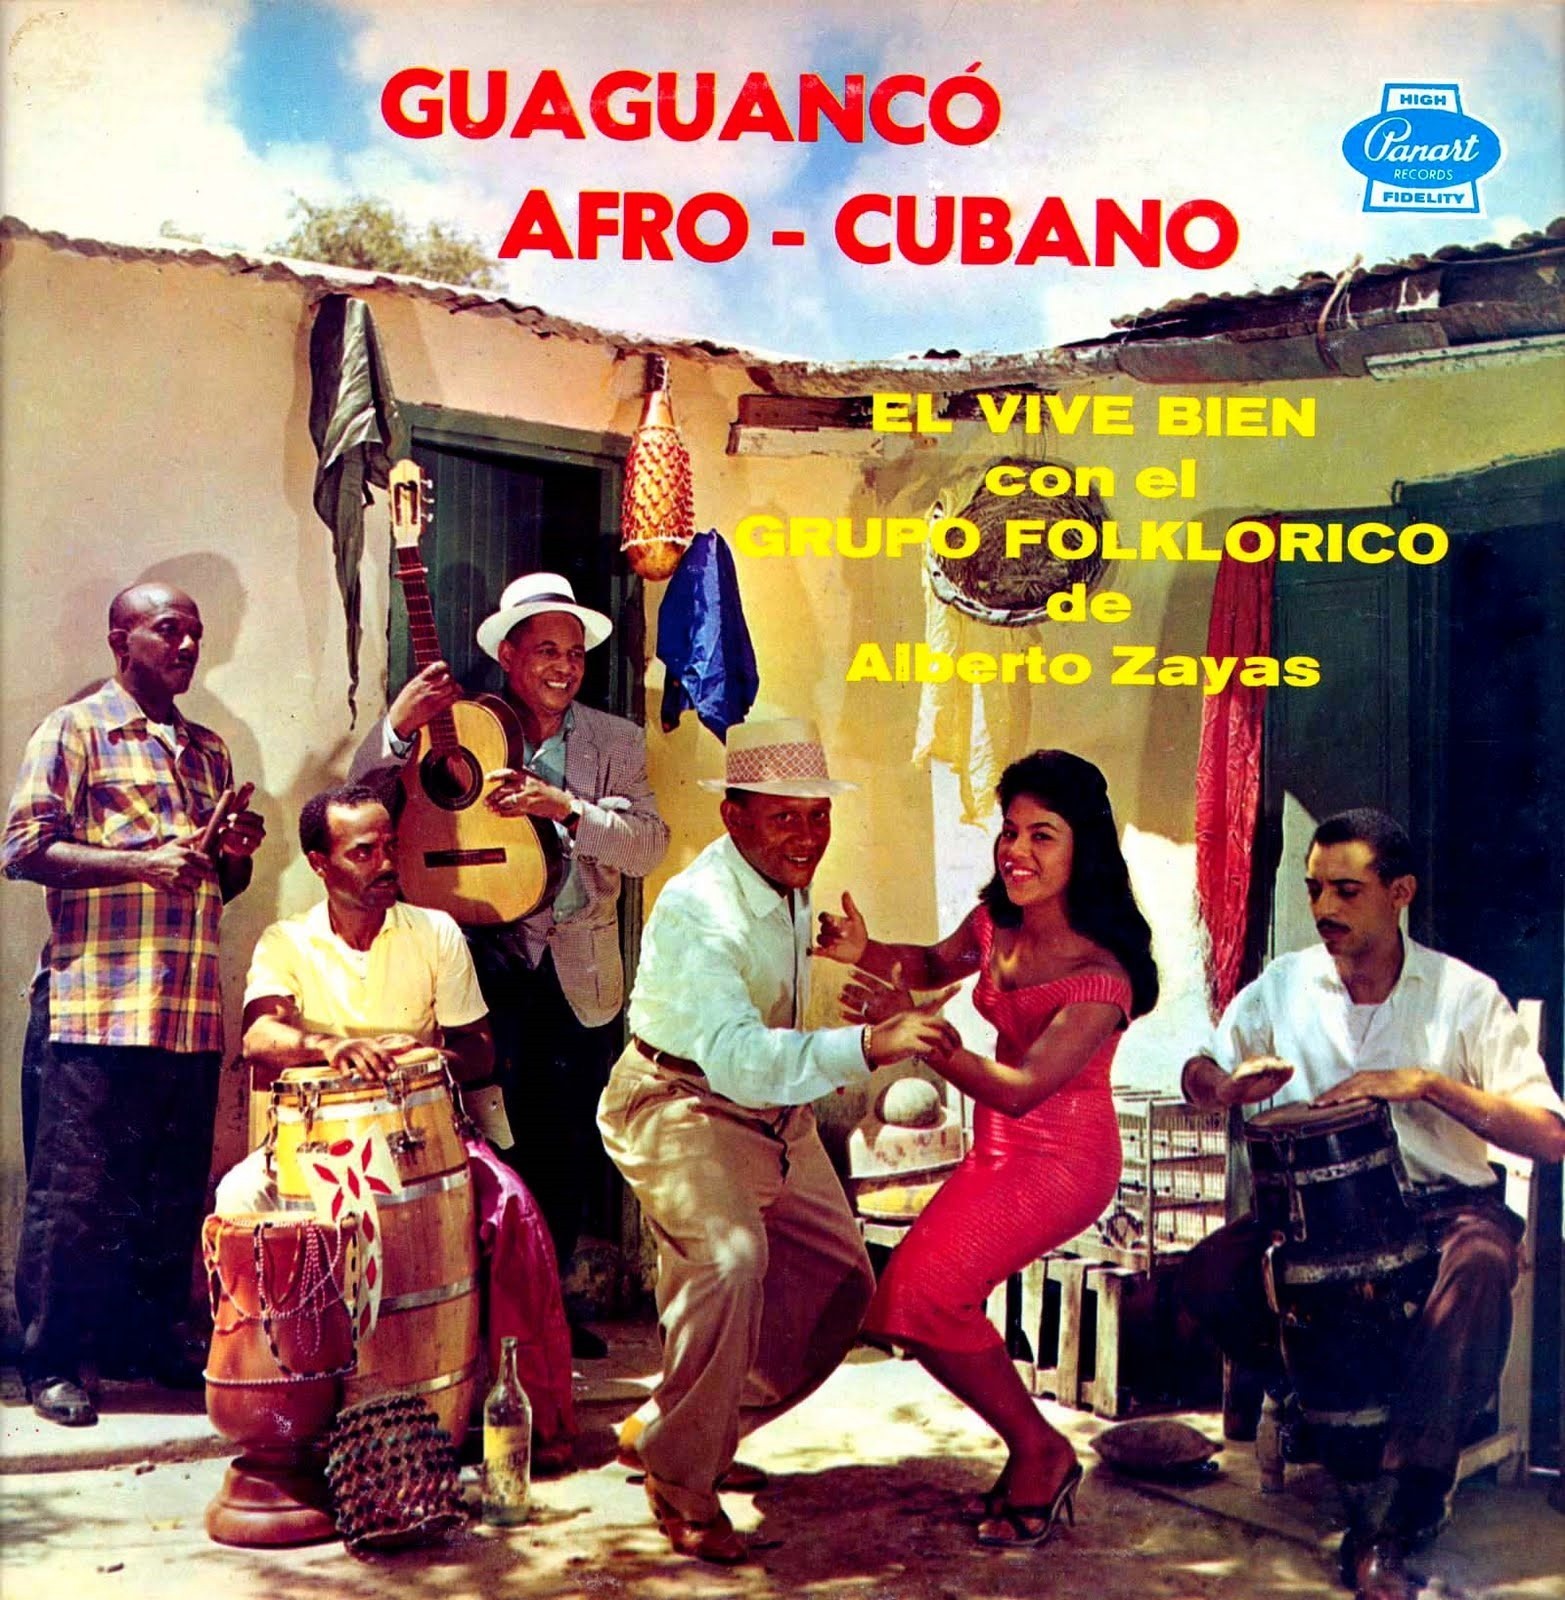 Panart 'Guaguancó Afro-Cubano' LP is in the video above. 